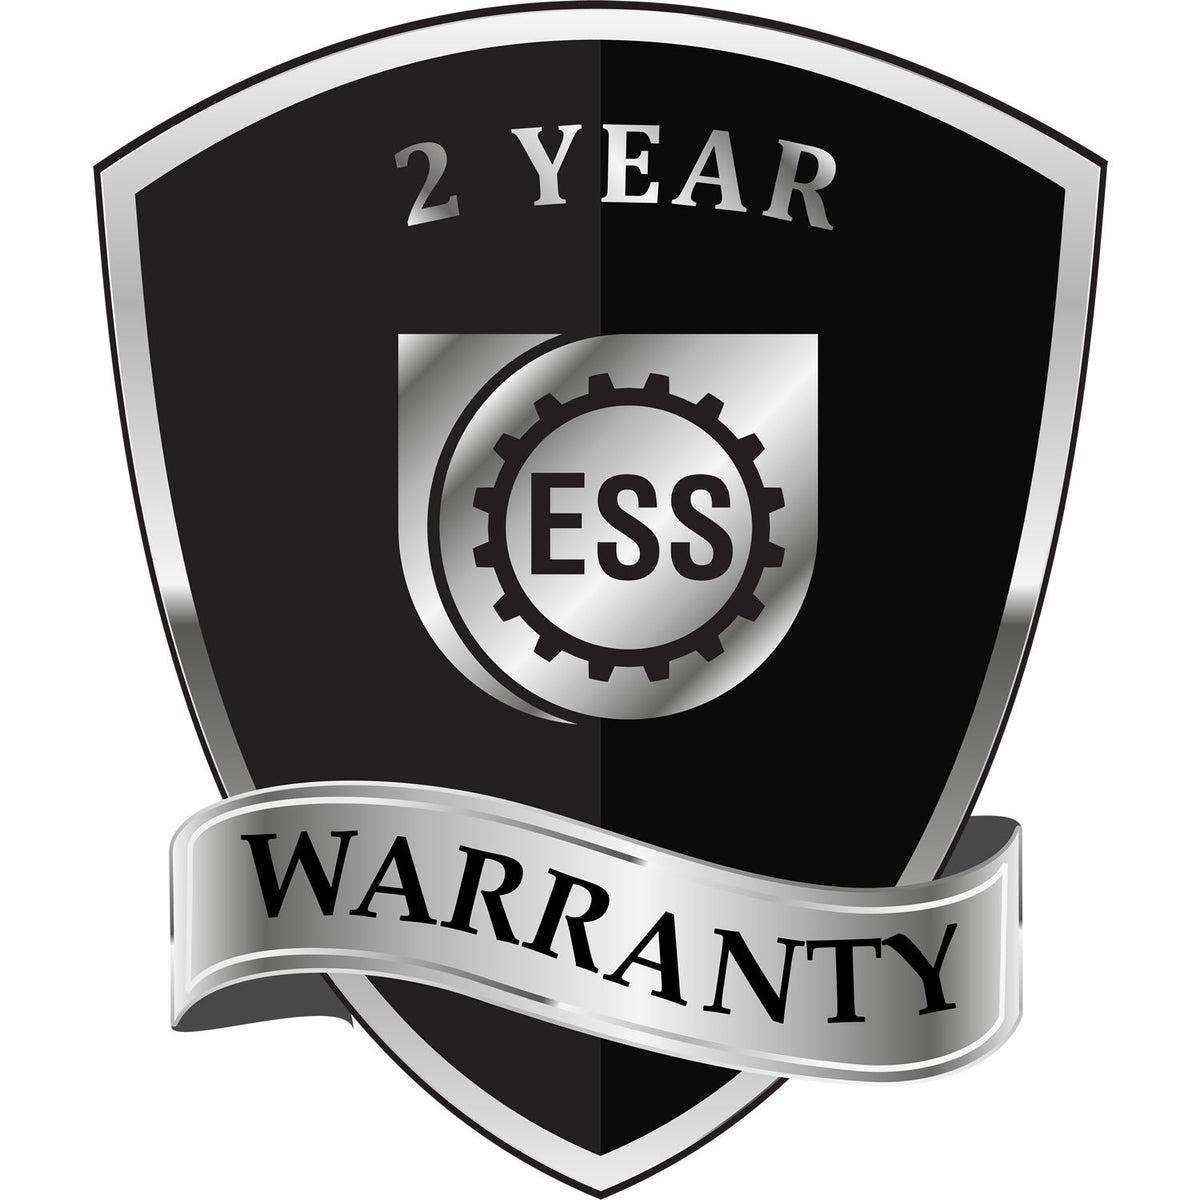 A badge or emblem showing a warranty icon for the Soft Rhode Island Professional Engineer Seal